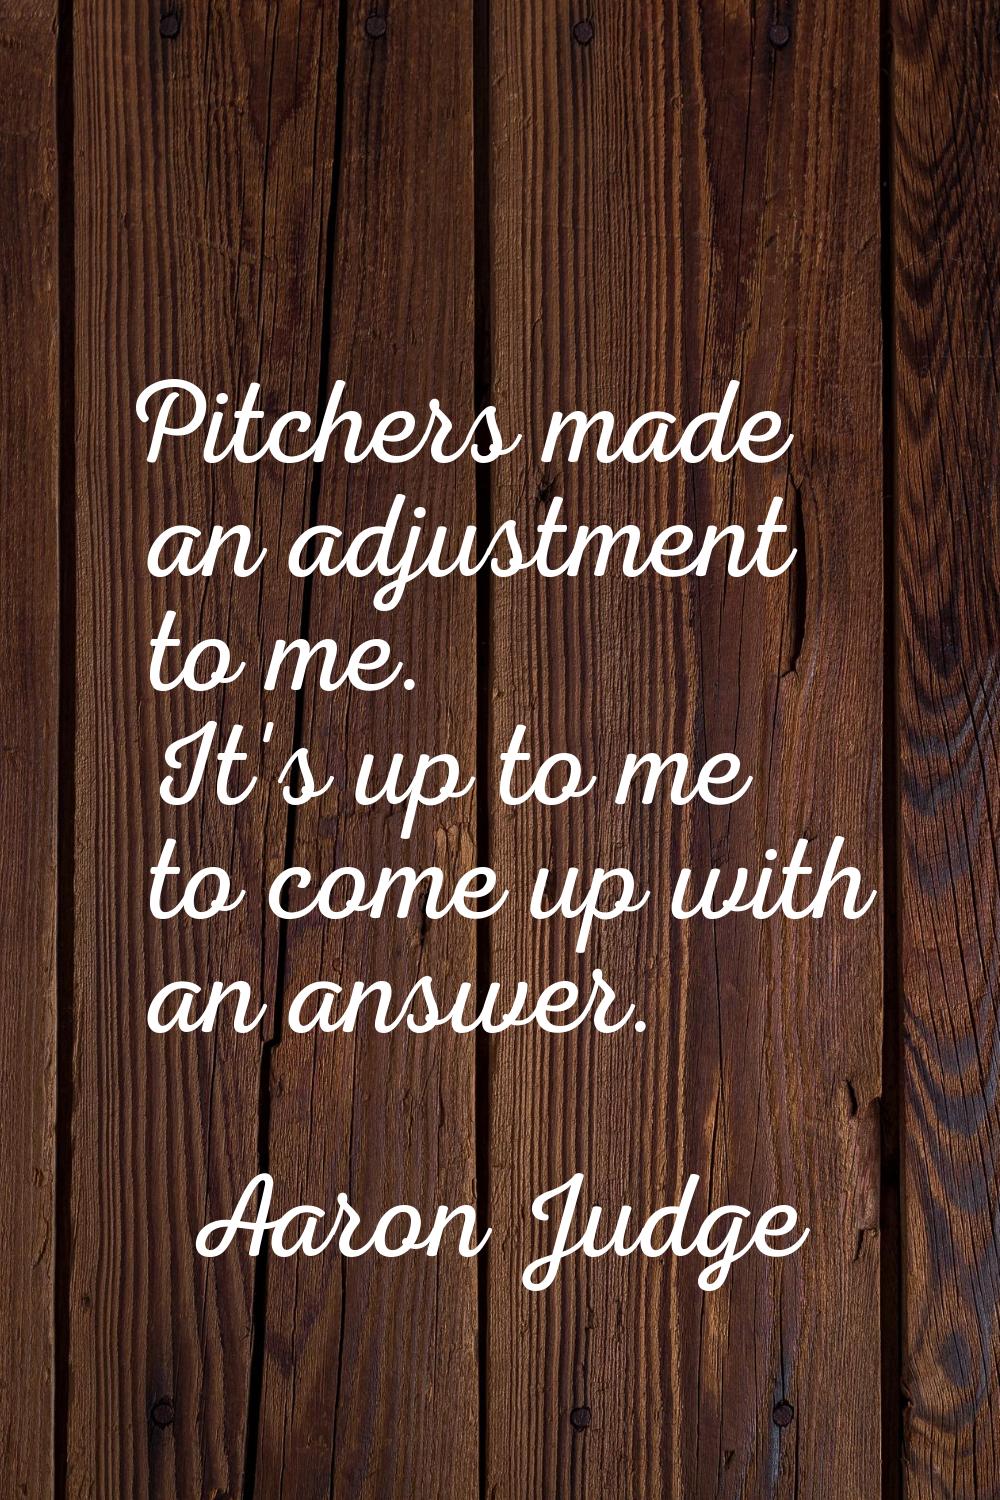 Pitchers made an adjustment to me. It's up to me to come up with an answer.